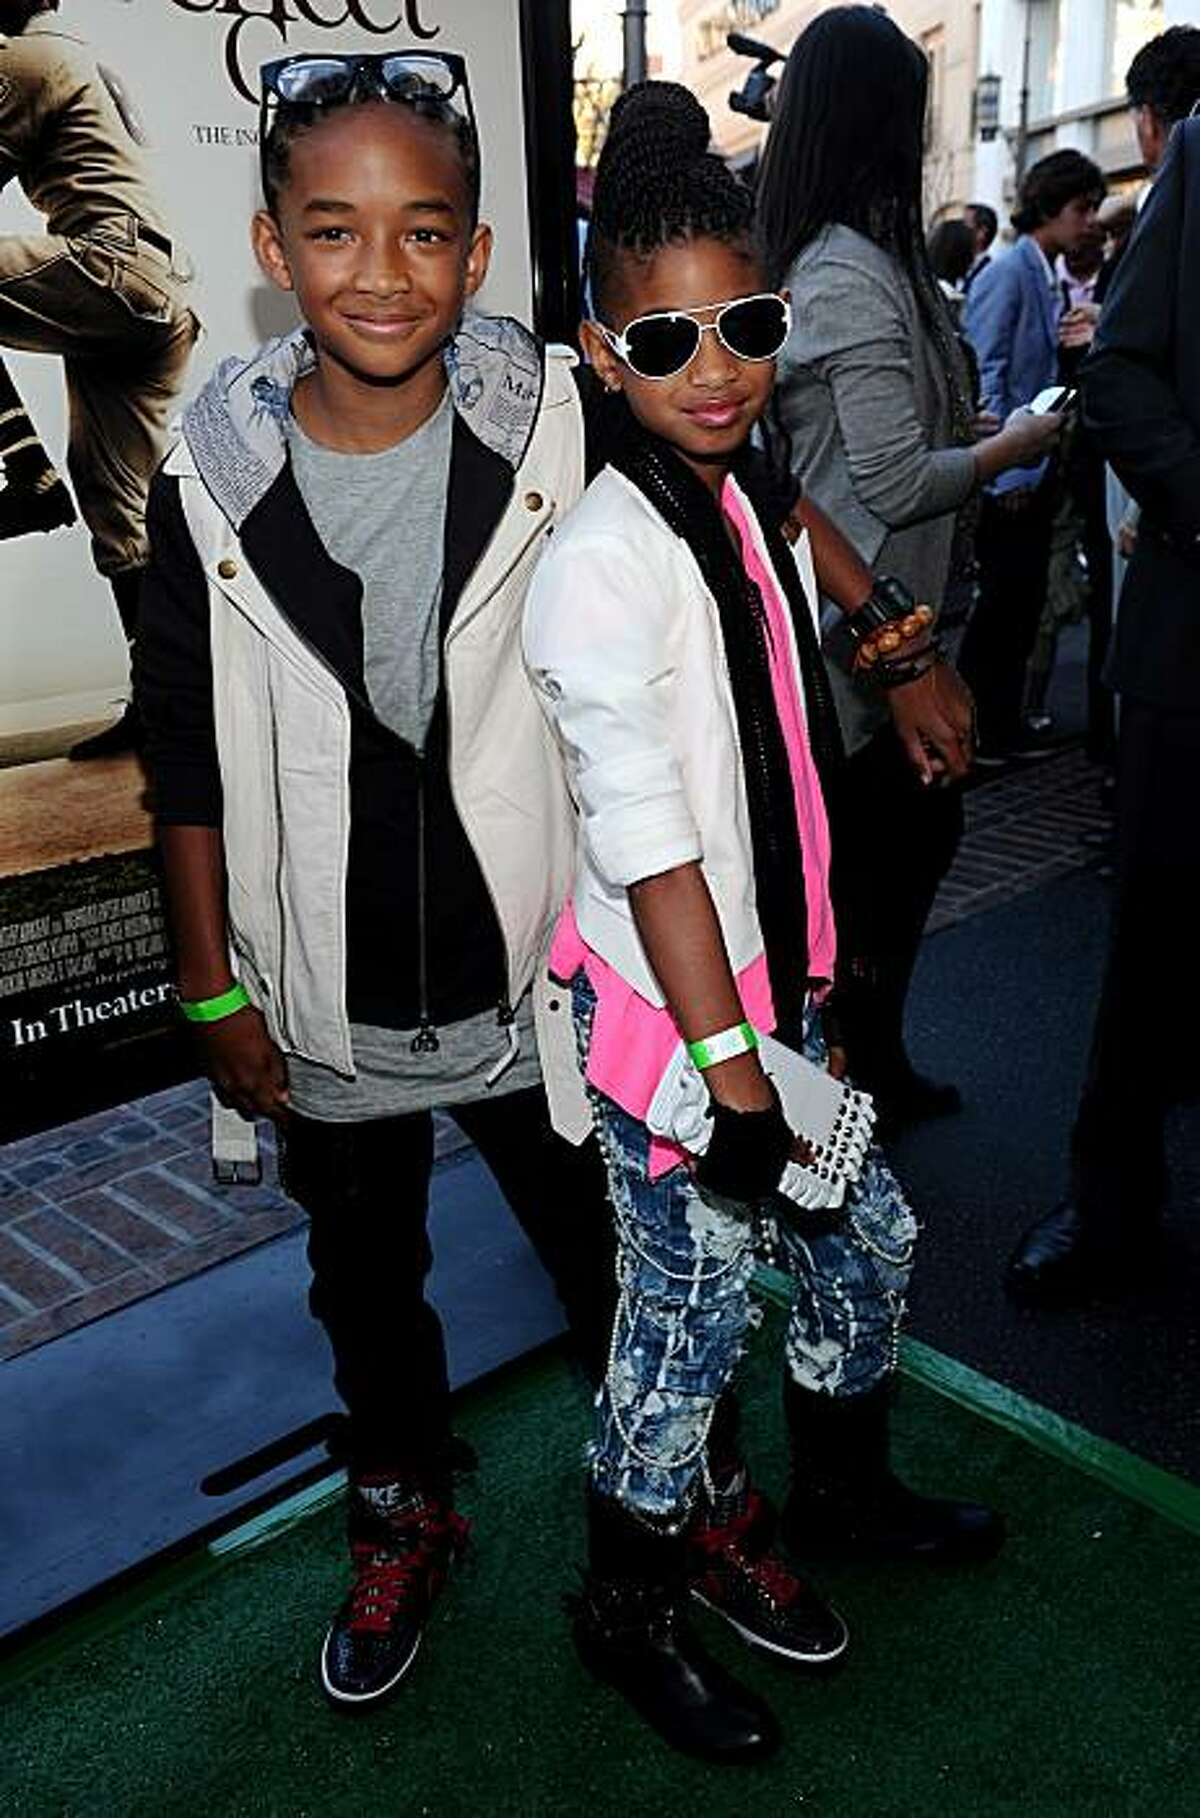 LOS ANGELES, CA - APRIL 05: Actor Jaden Smith and actress Willow Smith arrive at the premiere of IndustryWorks' "The Perfect Game" on April 5, 2010 in Los Angeles, California.